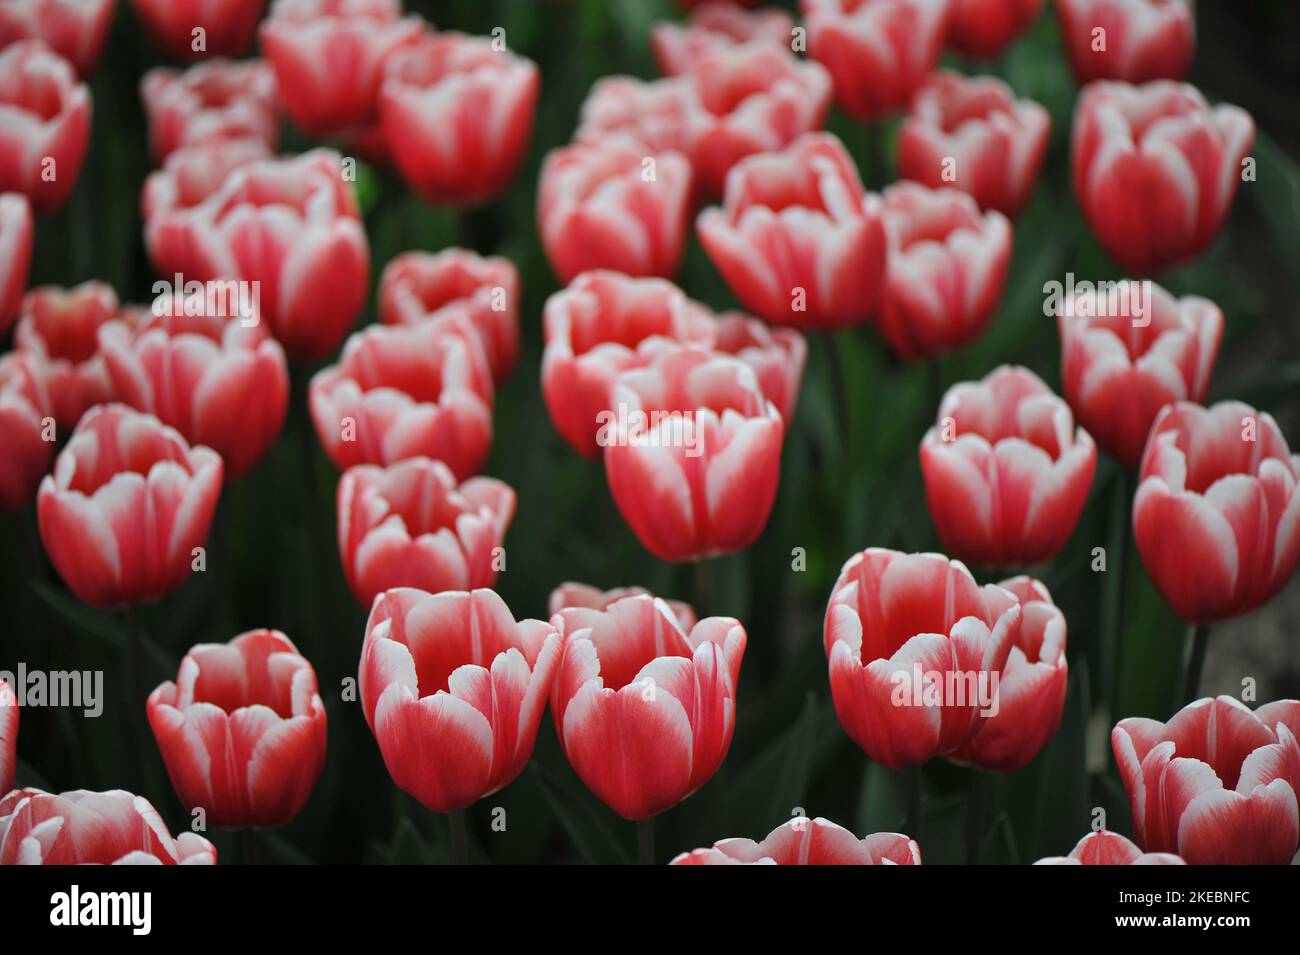 Red with white edges Triumph tulips (Tulipa) Timeless bloom in a garden in March Stock Photo